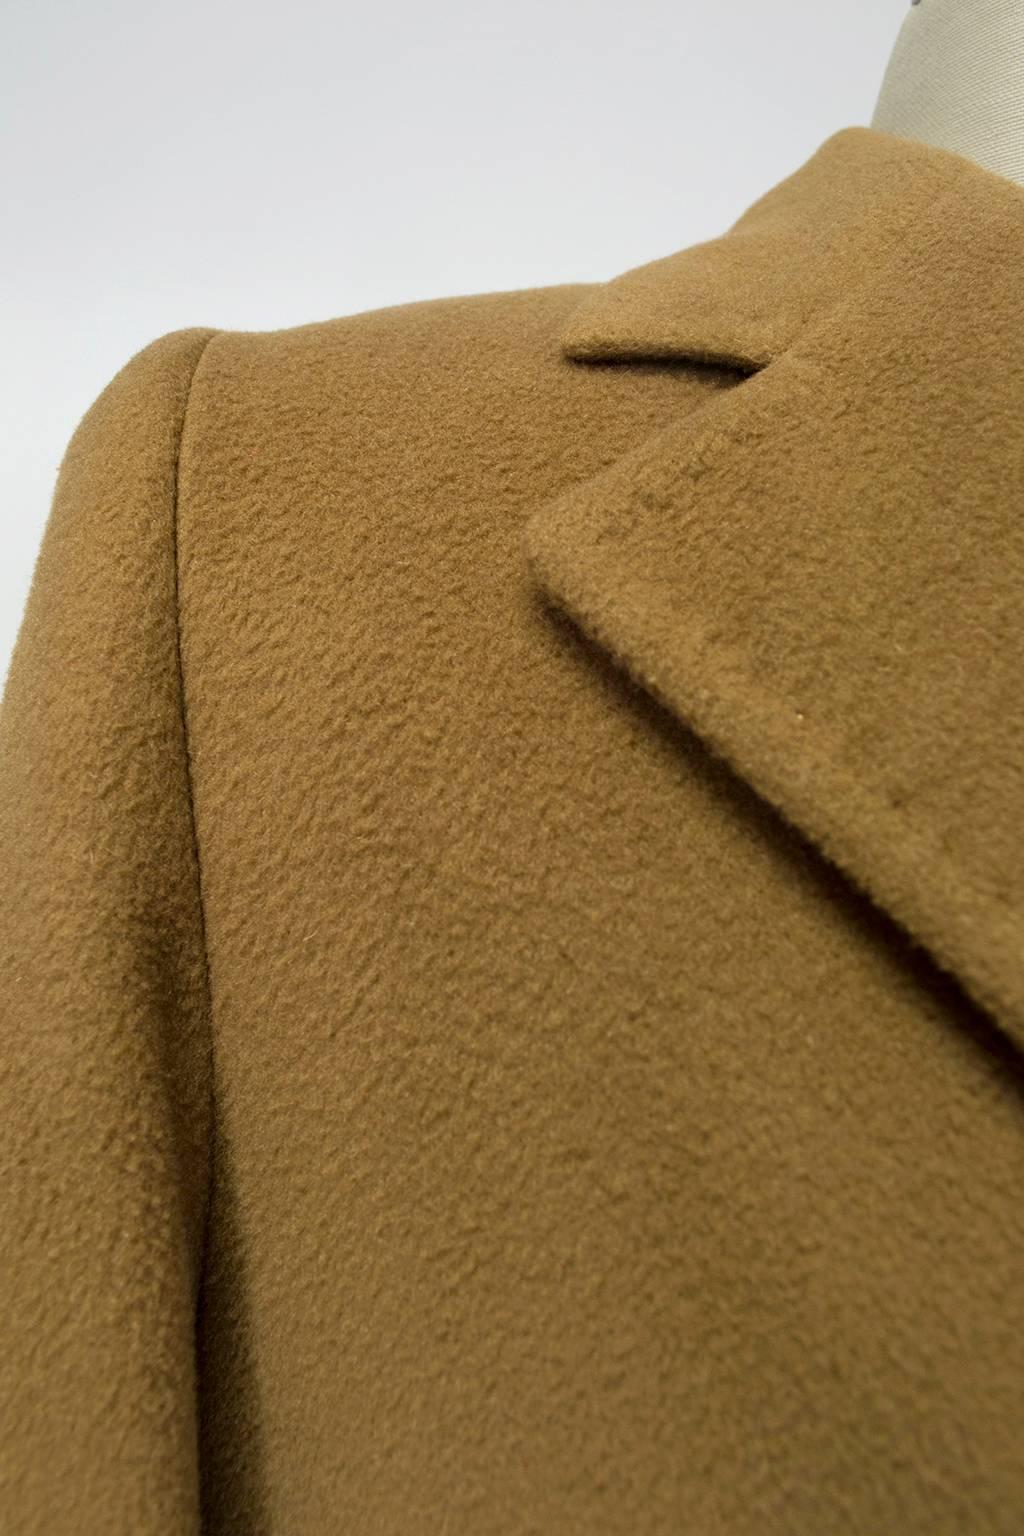 Men’s Minimalist Camel, Mink and Mongolian Cashmere 3-Button Topcoat - 40R, 1969 In Good Condition For Sale In Tucson, AZ